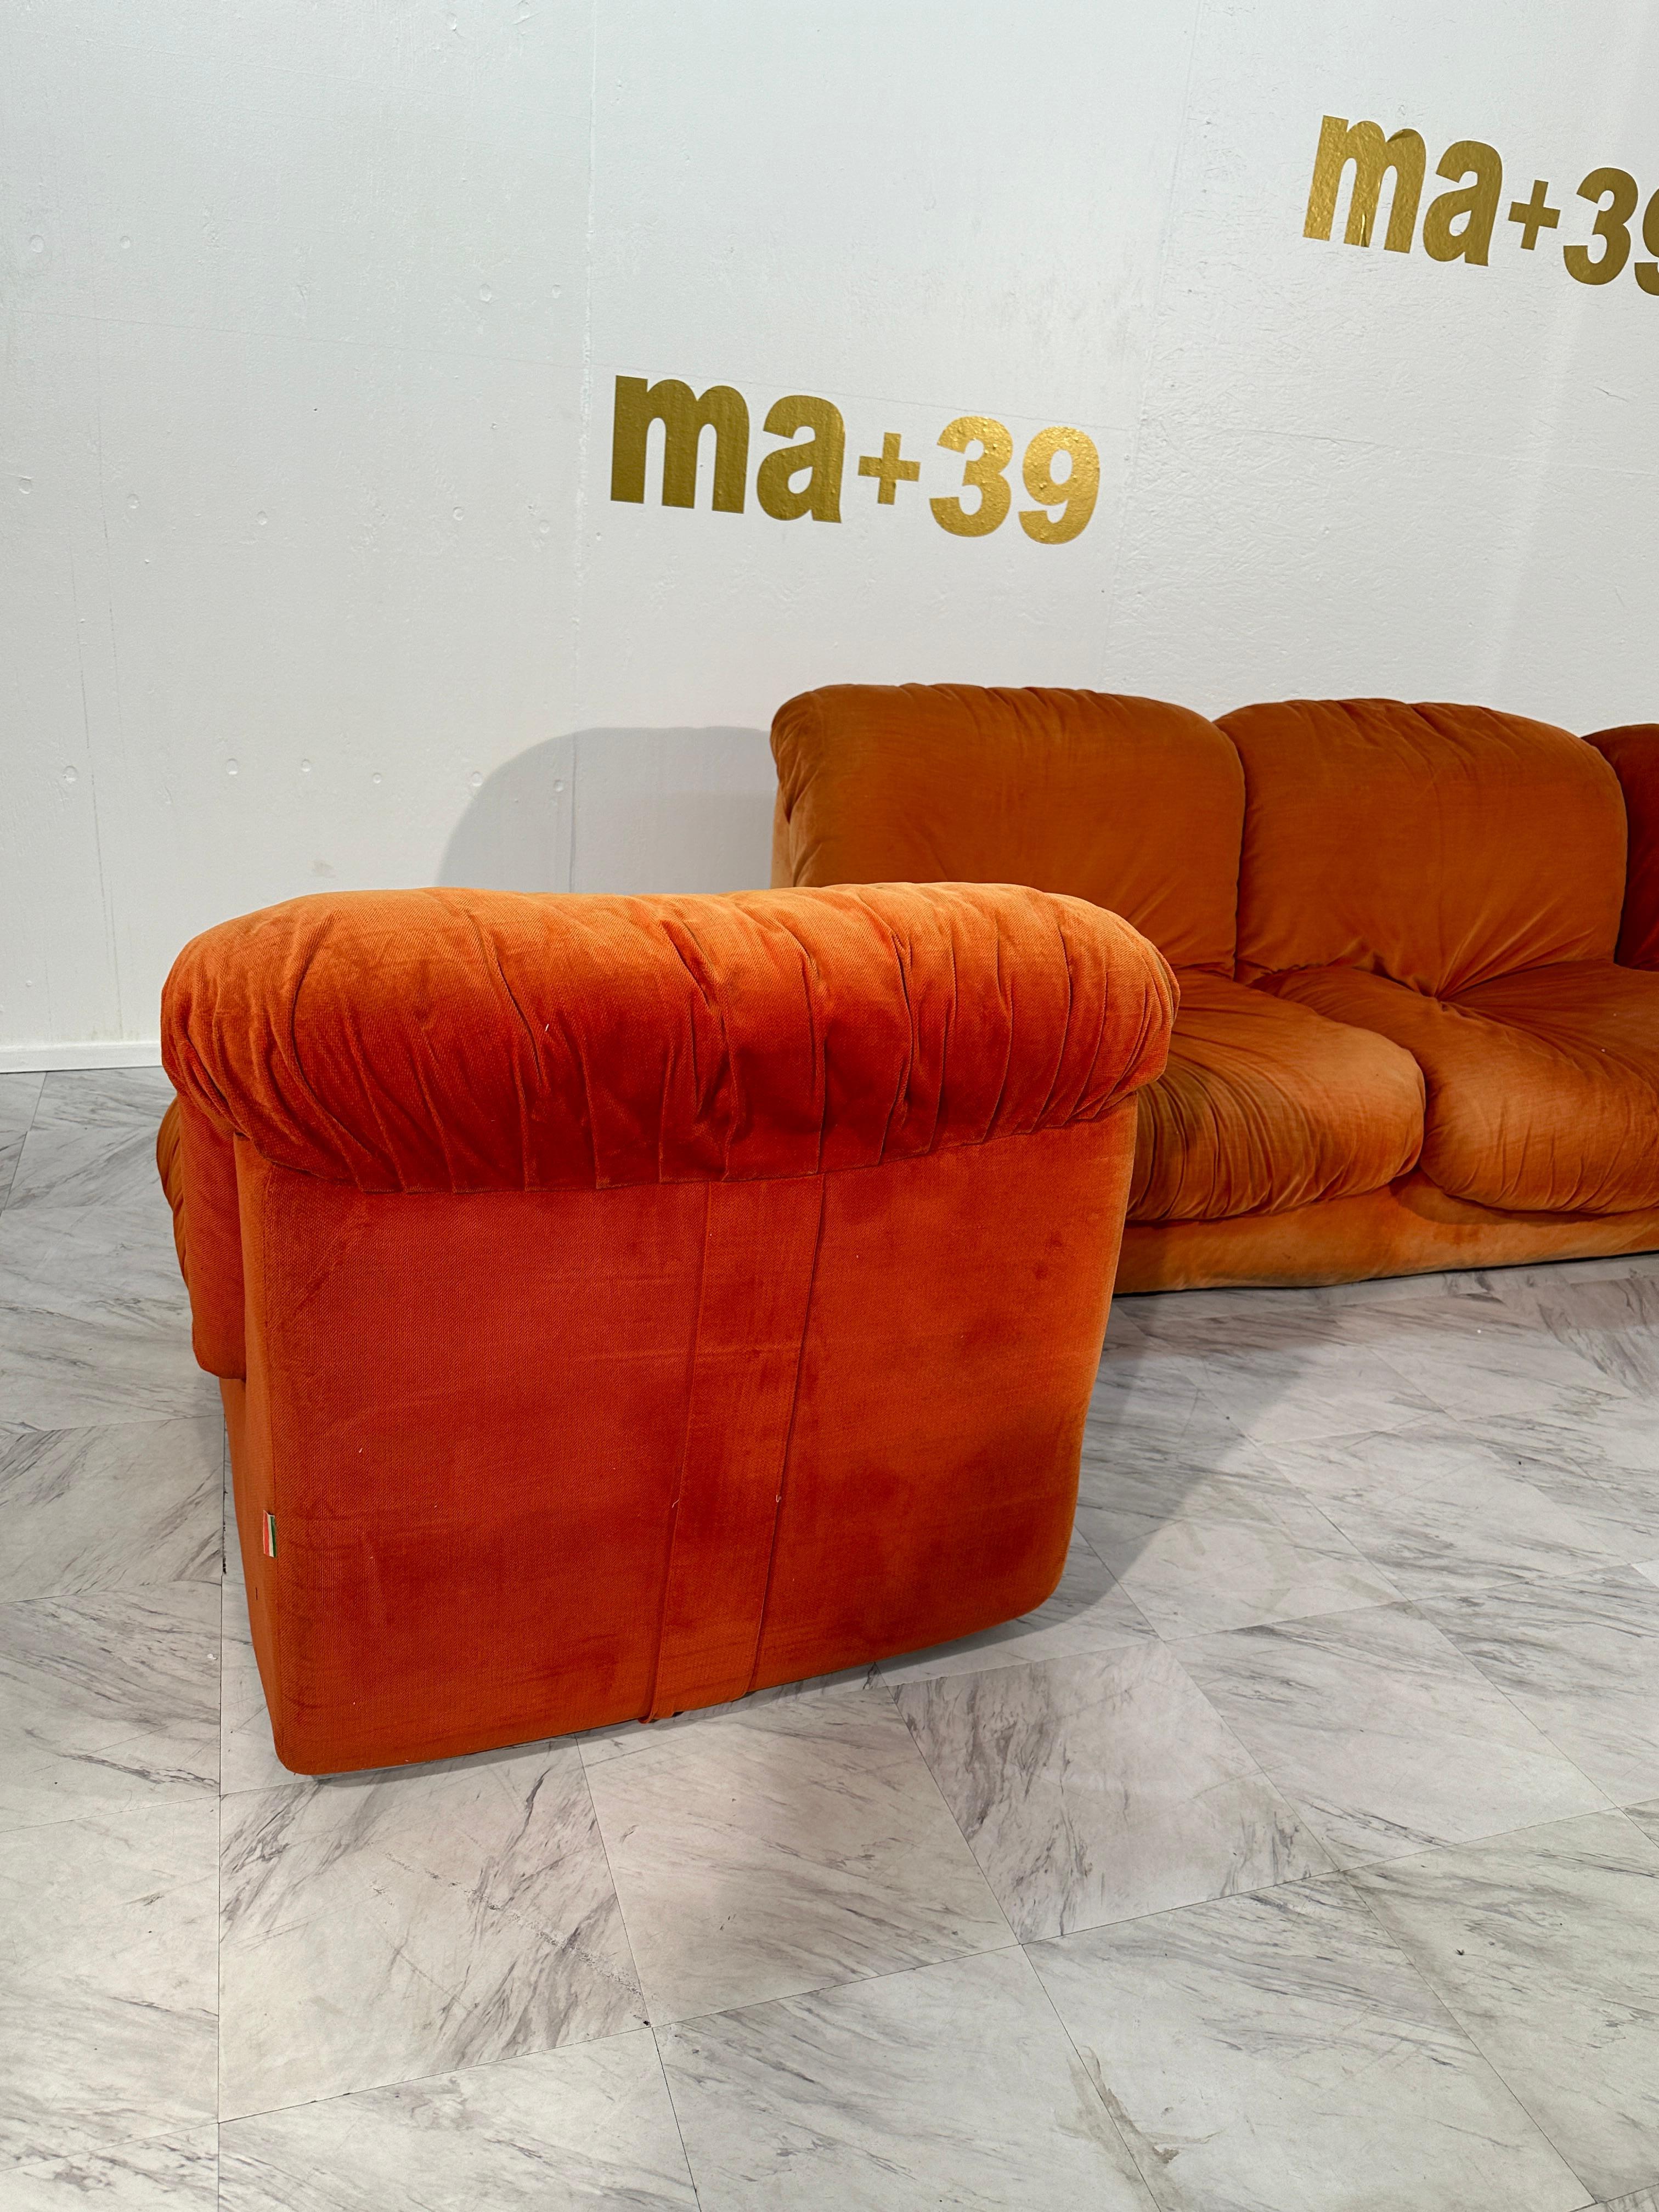 The Vintage Italian Modular Sofa from Airborne, originating in 1960s Italy, is an iconic piece of mid-century modern design. This sofa is characterized by its modular construction, allowing for flexibility in arrangement to suit various spaces and